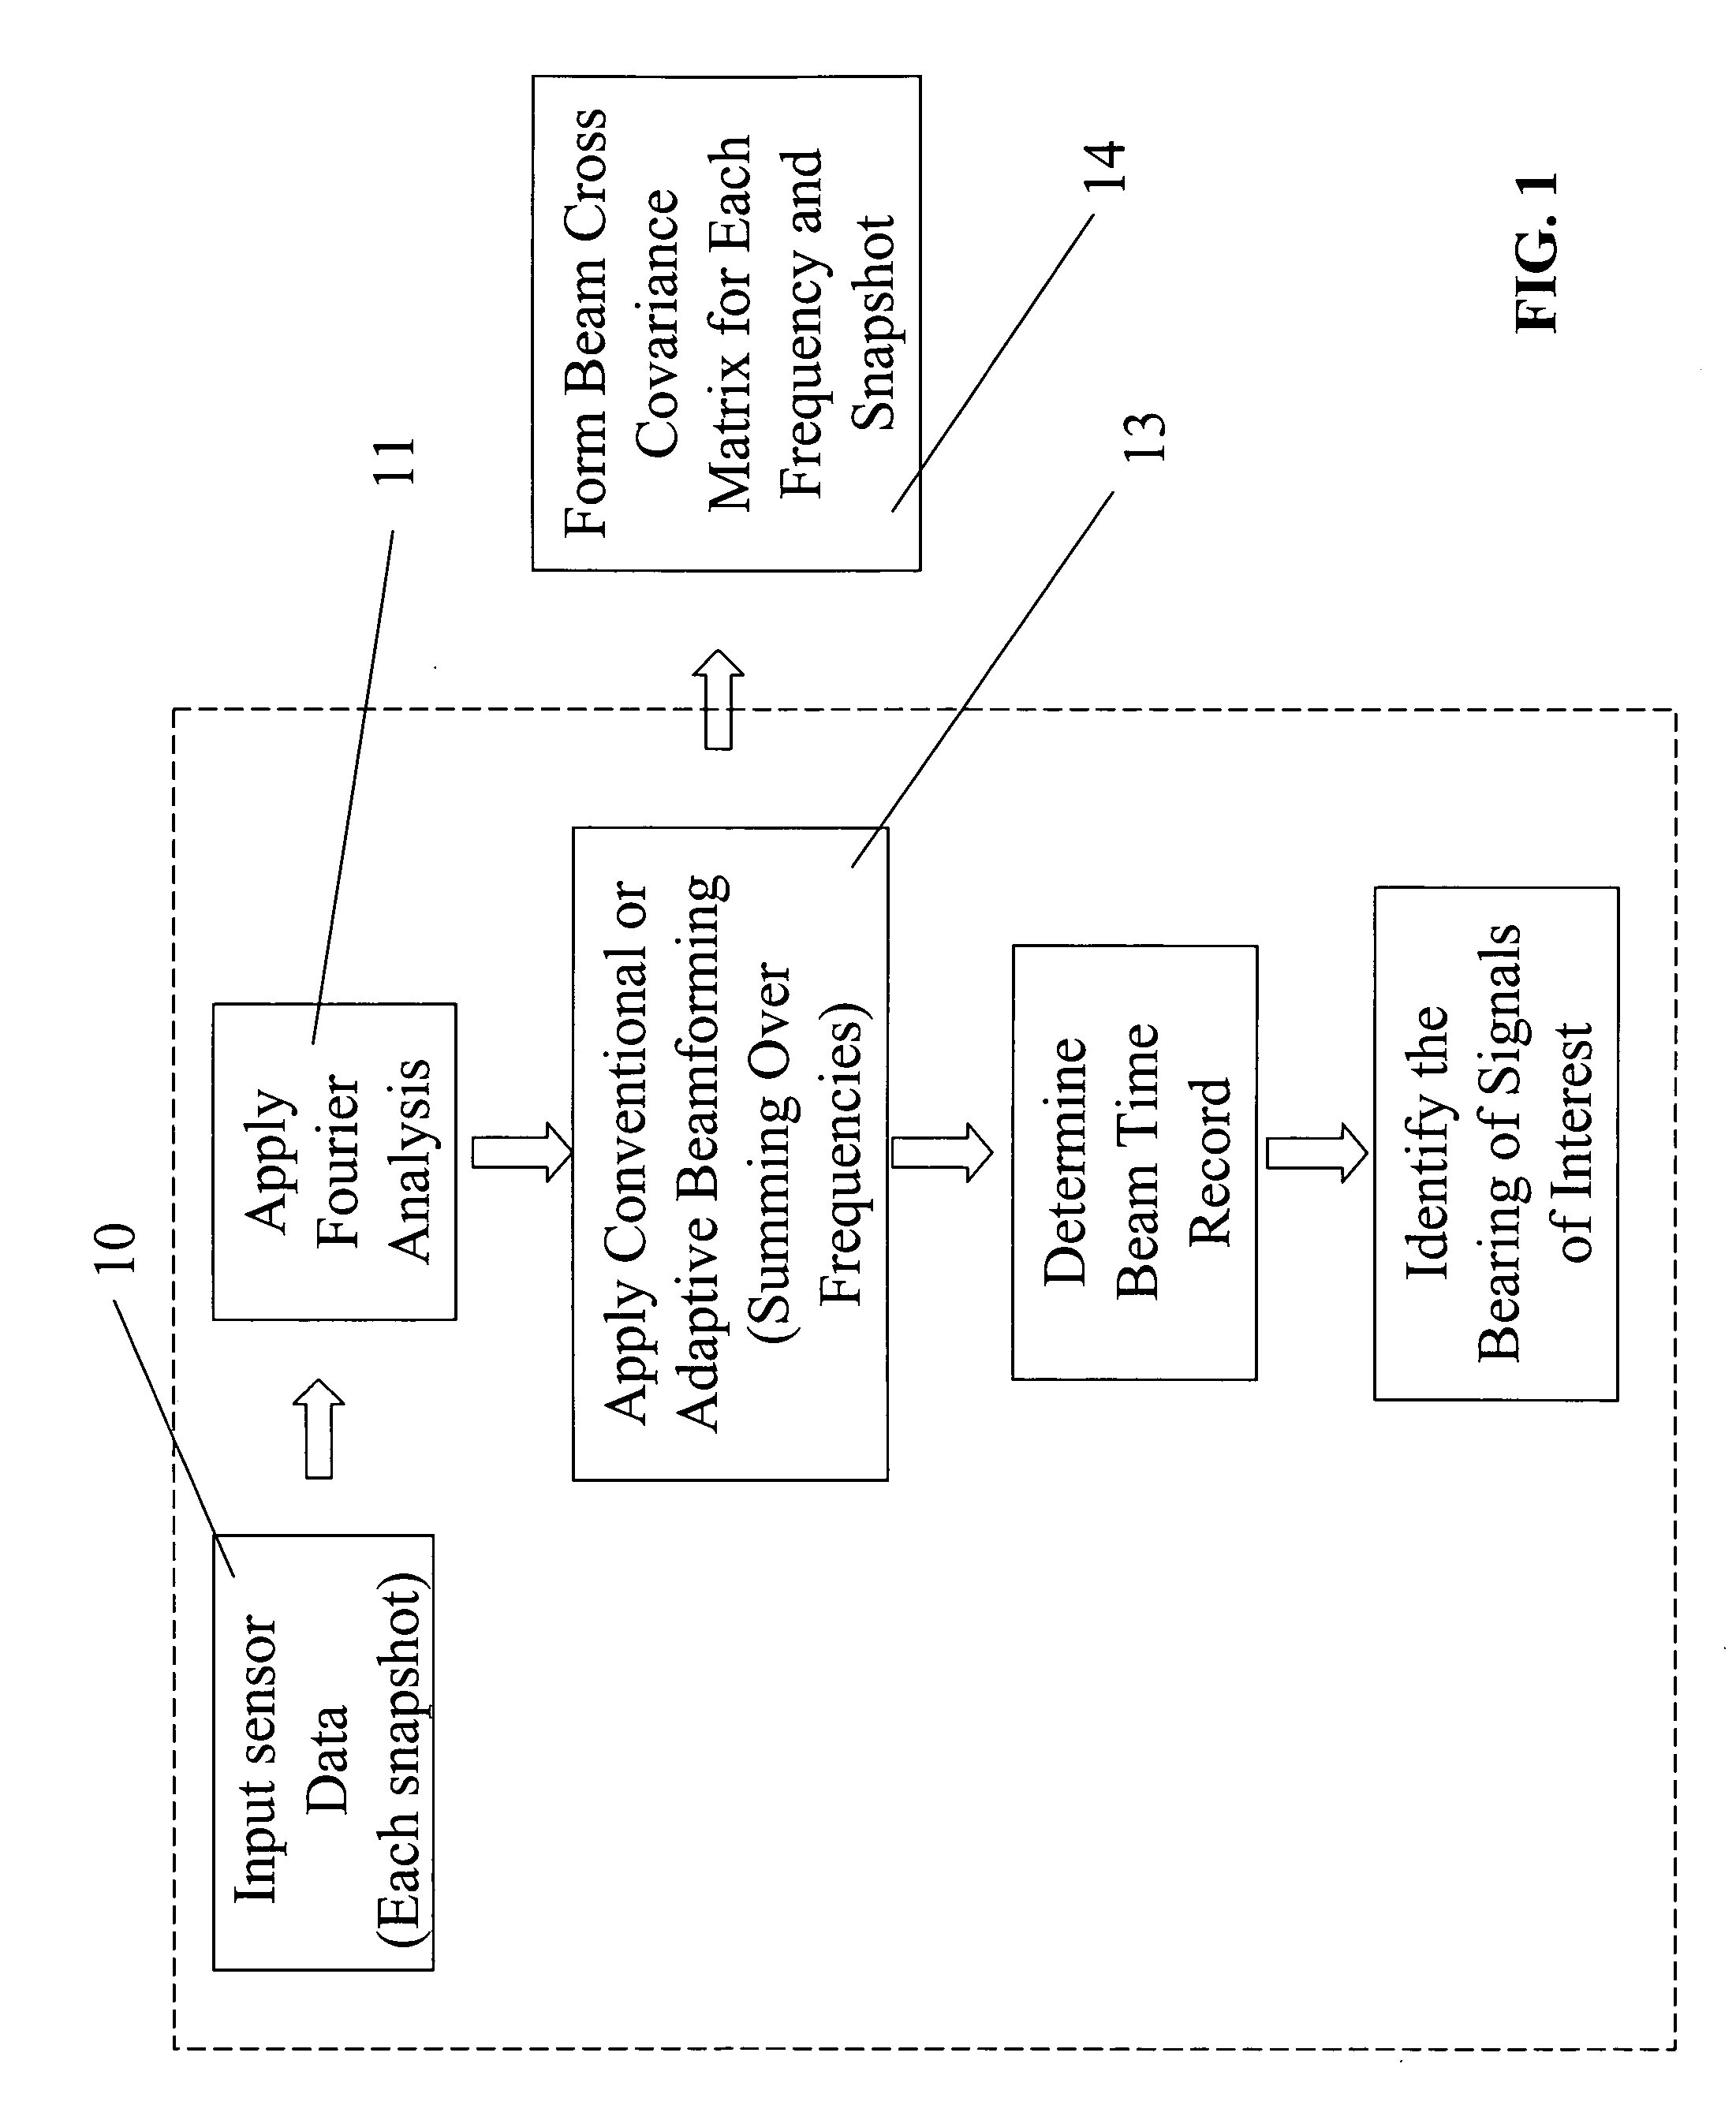 Method and apparatus for acoustic source tracking using a horizontal line array